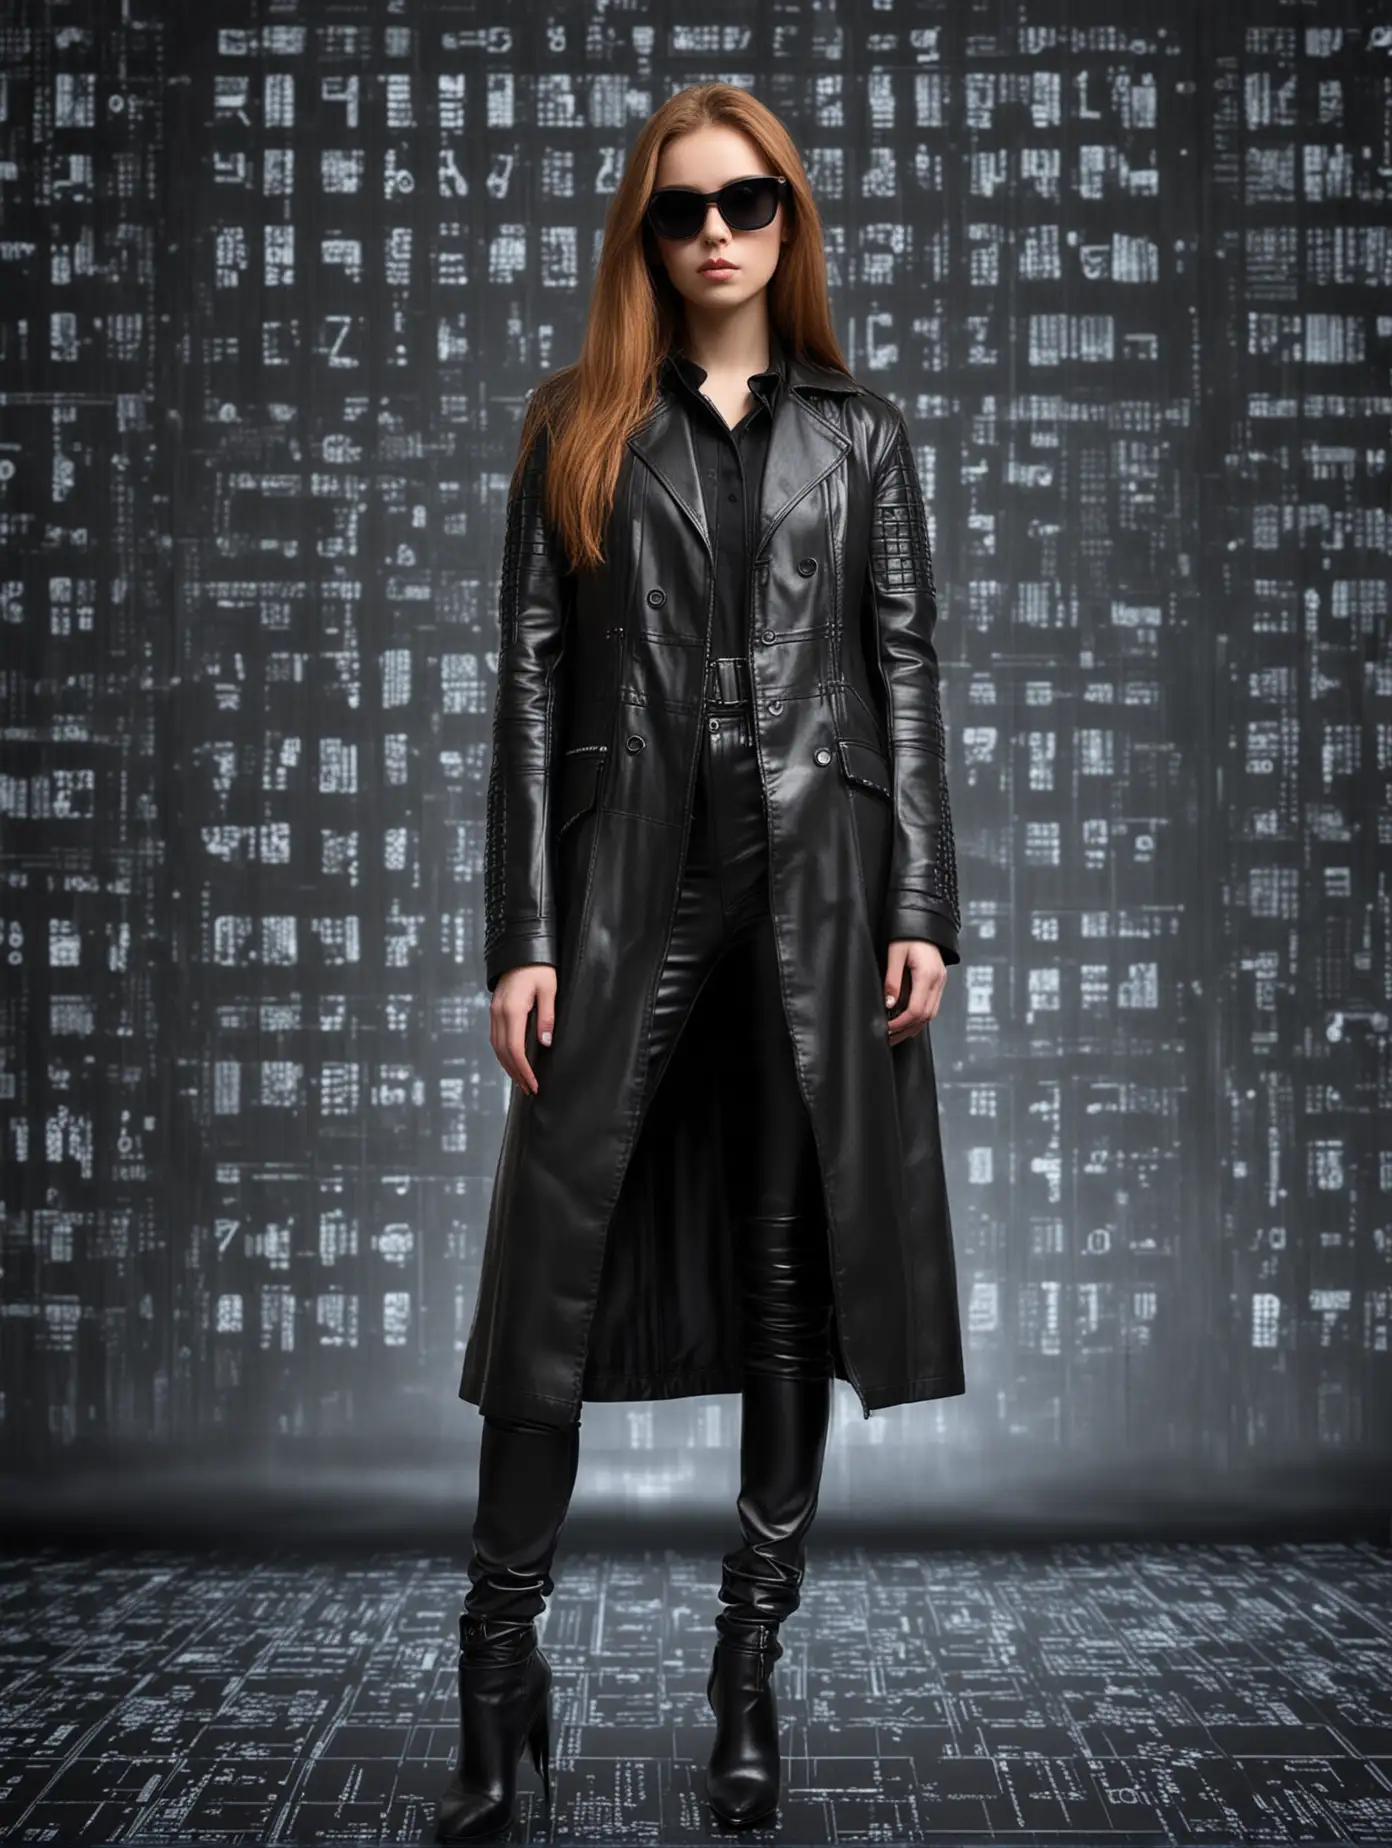 Stylish-Woman-in-MatrixInspired-Scene-Long-ChestnutHaired-Girl-in-Black-Leather-Coat-and-Sunglasses